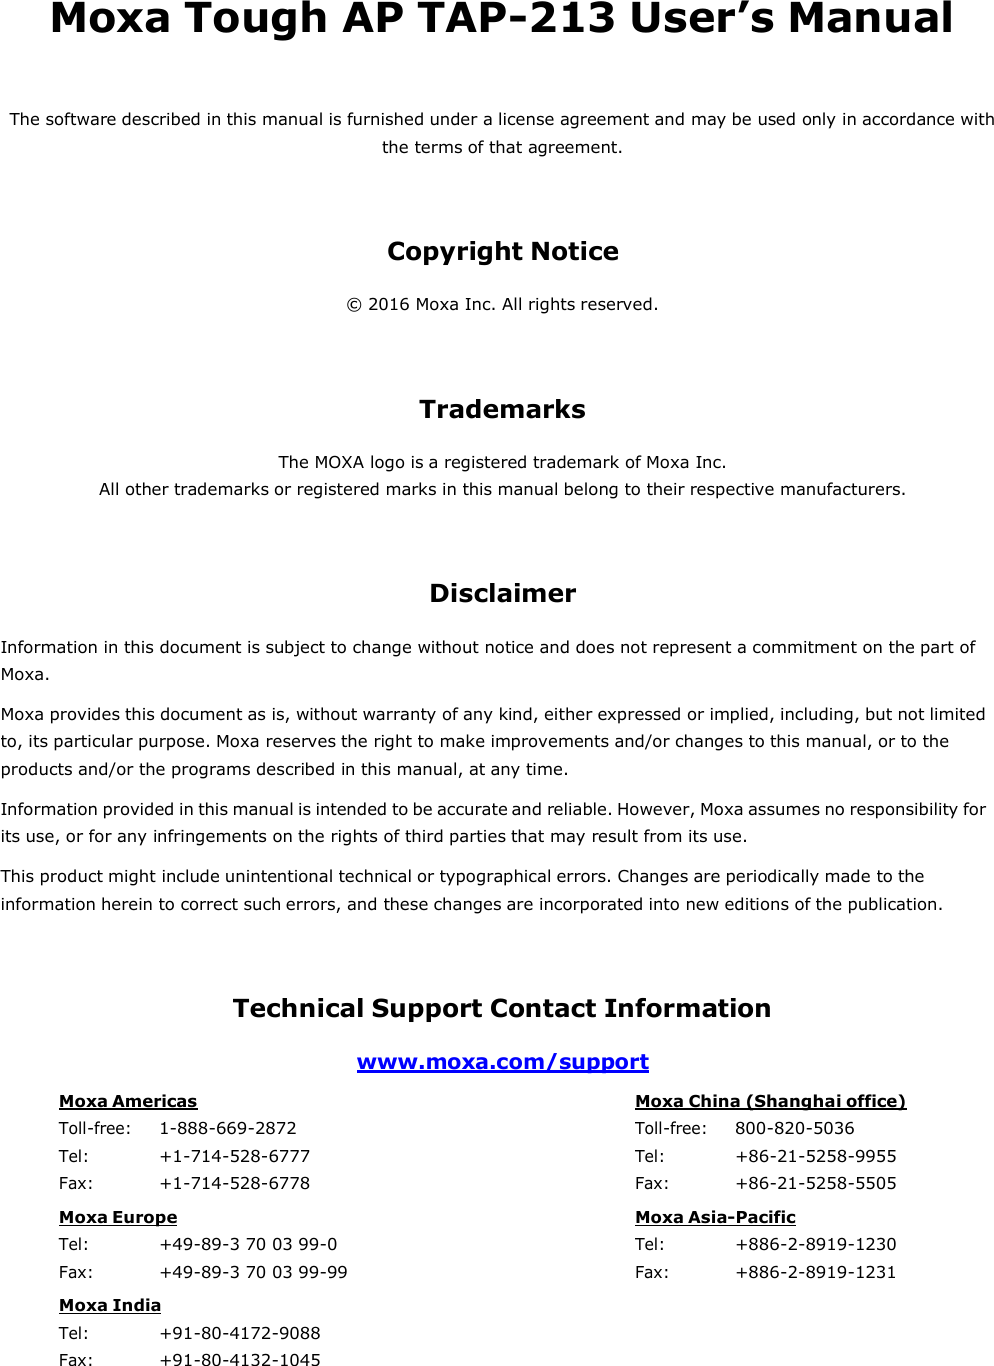 Moxa Tough AP TAP-213 User’s Manual  The software described in this manual is furnished under a license agreement and may be used only in accordance with the terms of that agreement.    Copyright Notice  © 2016 Moxa Inc. All rights reserved.     Trademarks  The MOXA logo is a registered trademark of Moxa Inc. All other trademarks or registered marks in this manual belong to their respective manufacturers.     Disclaimer  Information in this document is subject to change without notice and does not represent a commitment on the part of Moxa. Moxa provides this document as is, without warranty of any kind, either expressed or implied, including, but not limited to, its particular purpose. Moxa reserves the right to make improvements and/or changes to this manual, or to the products and/or the programs described in this manual, at any time. Information provided in this manual is intended to be accurate and reliable. However, Moxa assumes no responsibility for its use, or for any infringements on the rights of third parties that may result from its use. This product might include unintentional technical or typographical errors. Changes are periodically made to the information herein to correct such errors, and these changes are incorporated into new editions of the publication.    Technical Support Contact Information  www.moxa.com/support  Moxa Americas Toll-free: 1-888-669-2872 Tel: +1-714-528-6777 Fax: +1-714-528-6778 Moxa China (Shanghai office) Toll-free: 800-820-5036 Tel: +86-21-5258-9955 Fax: +86-21-5258-5505 Moxa Europe Tel: +49-89-3 70 03 99-0 Fax: +49-89-3 70 03 99-99 Moxa Asia-Pacific Tel: +886-2-8919-1230 Fax: +886-2-8919-1231 Moxa India Tel: +91-80-4172-9088 Fax: +91-80-4132-1045 